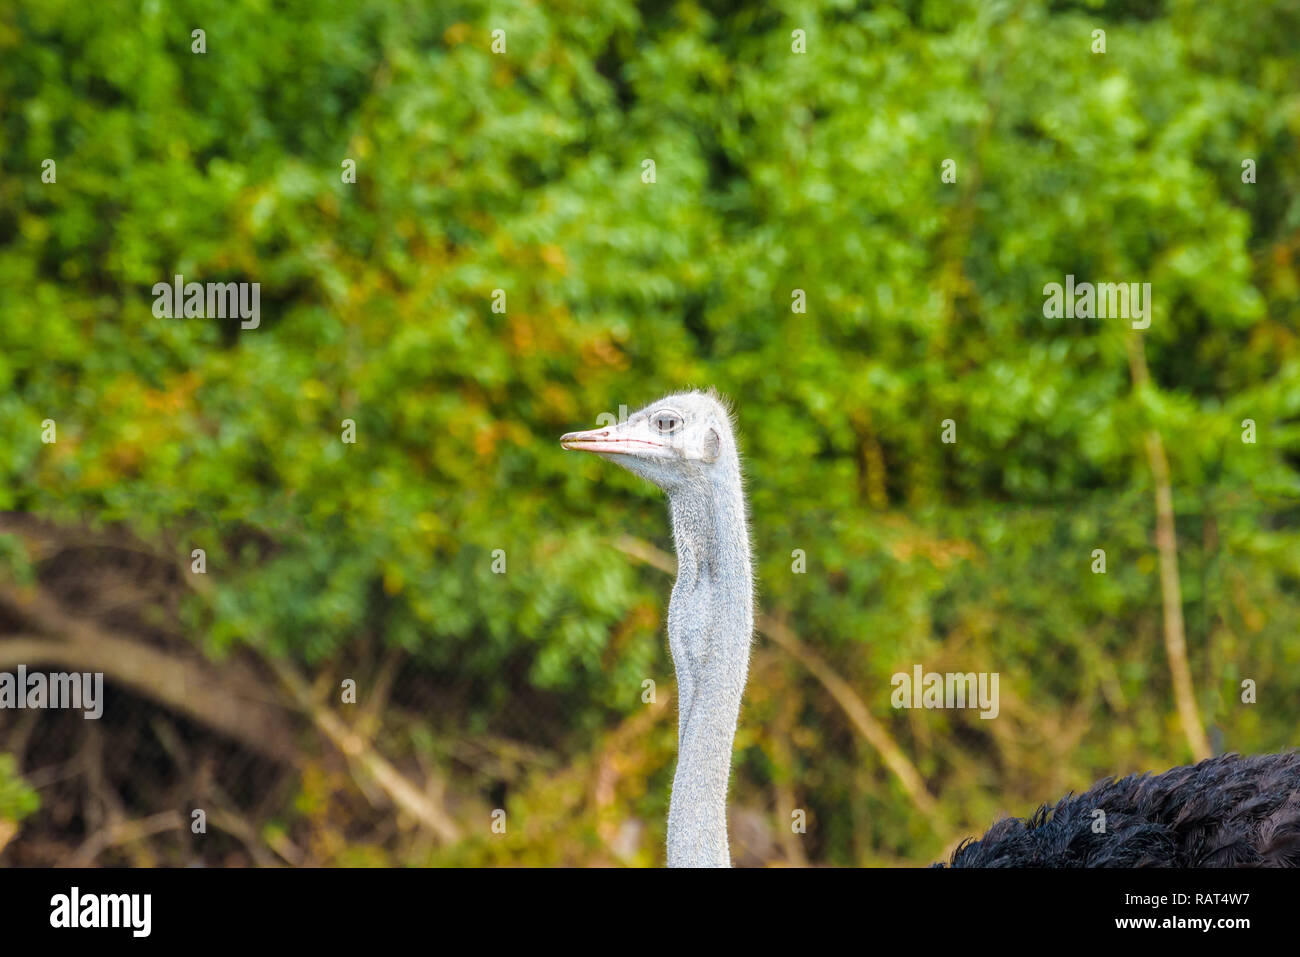 Portrait of common ostrich (Struthio camelus),species of large flightless bird native to Africa on a green background Stock Photo